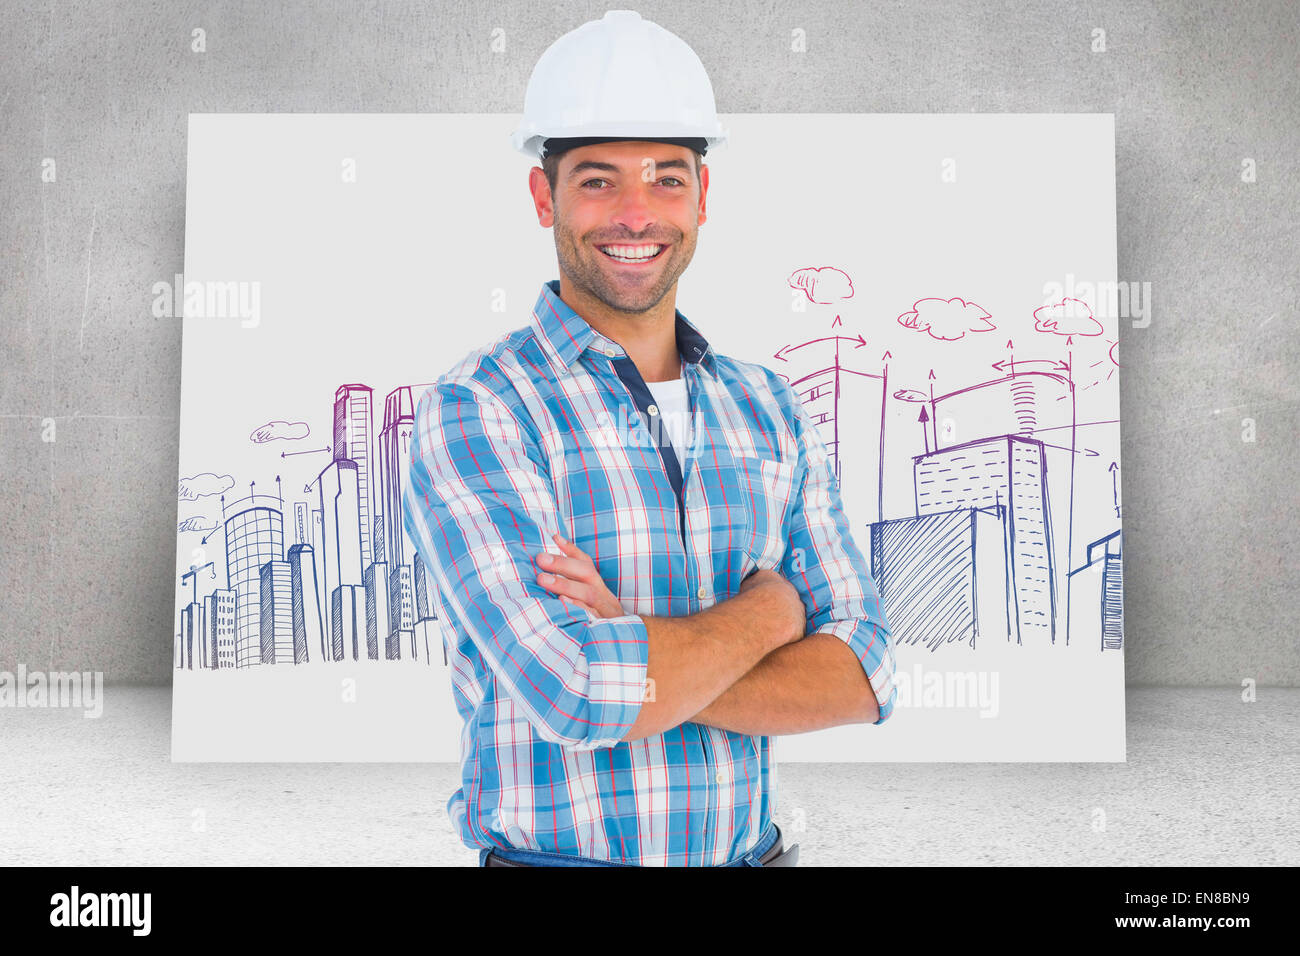 Composite image of confident manual working wearing hardhat Stock Photo